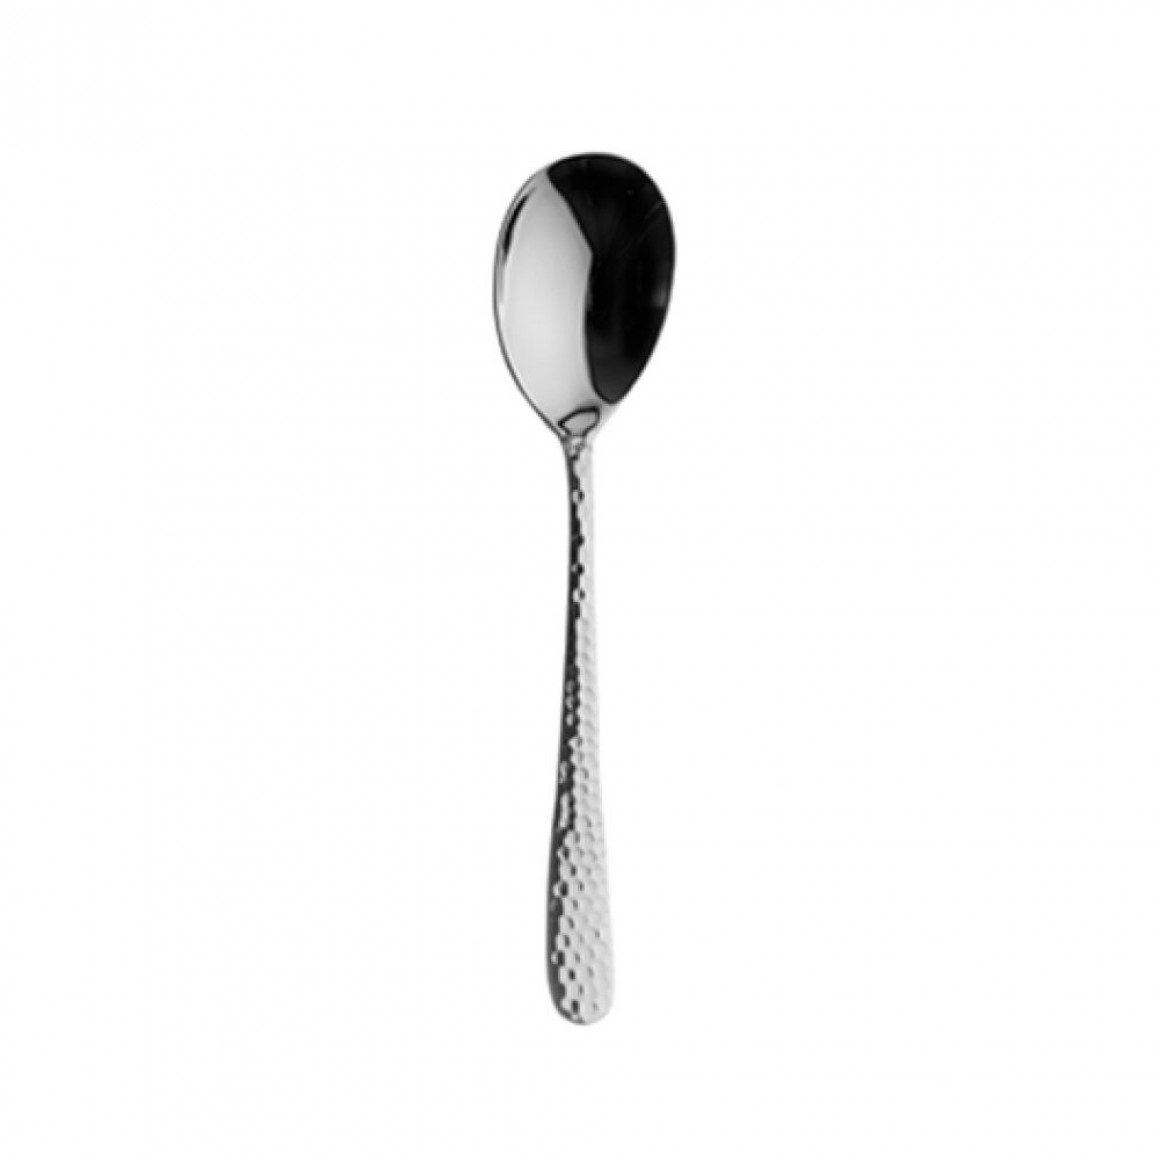 Lima Serving spoon